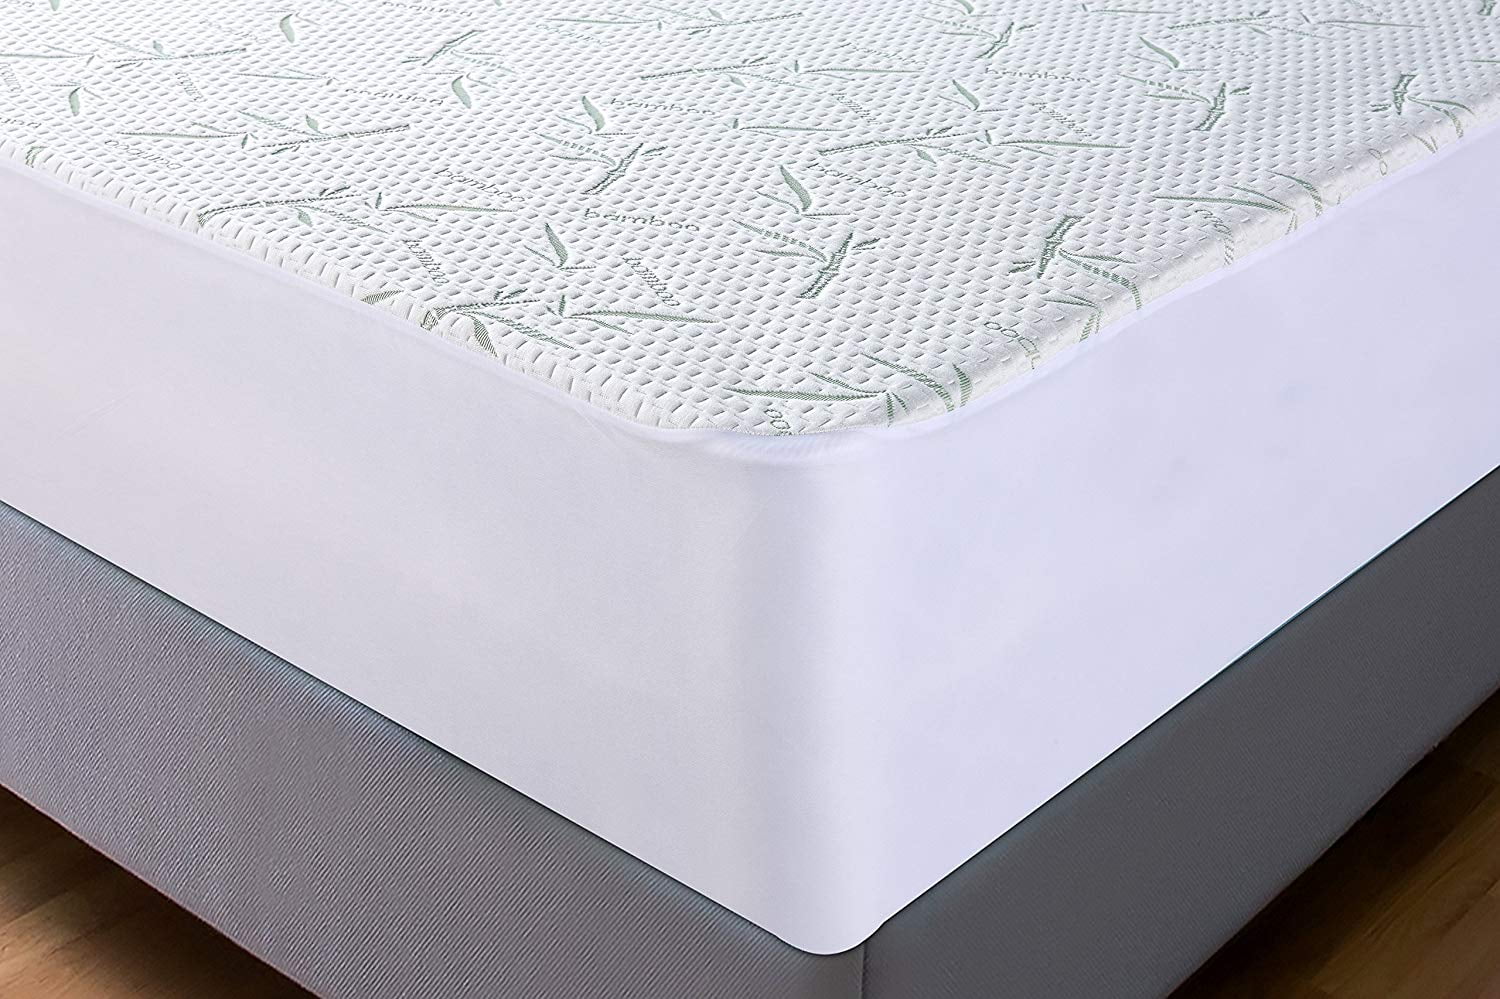 Bamboo Hypoallergenic Mattress Protector Cover Breathable Cool Cycle Technology 